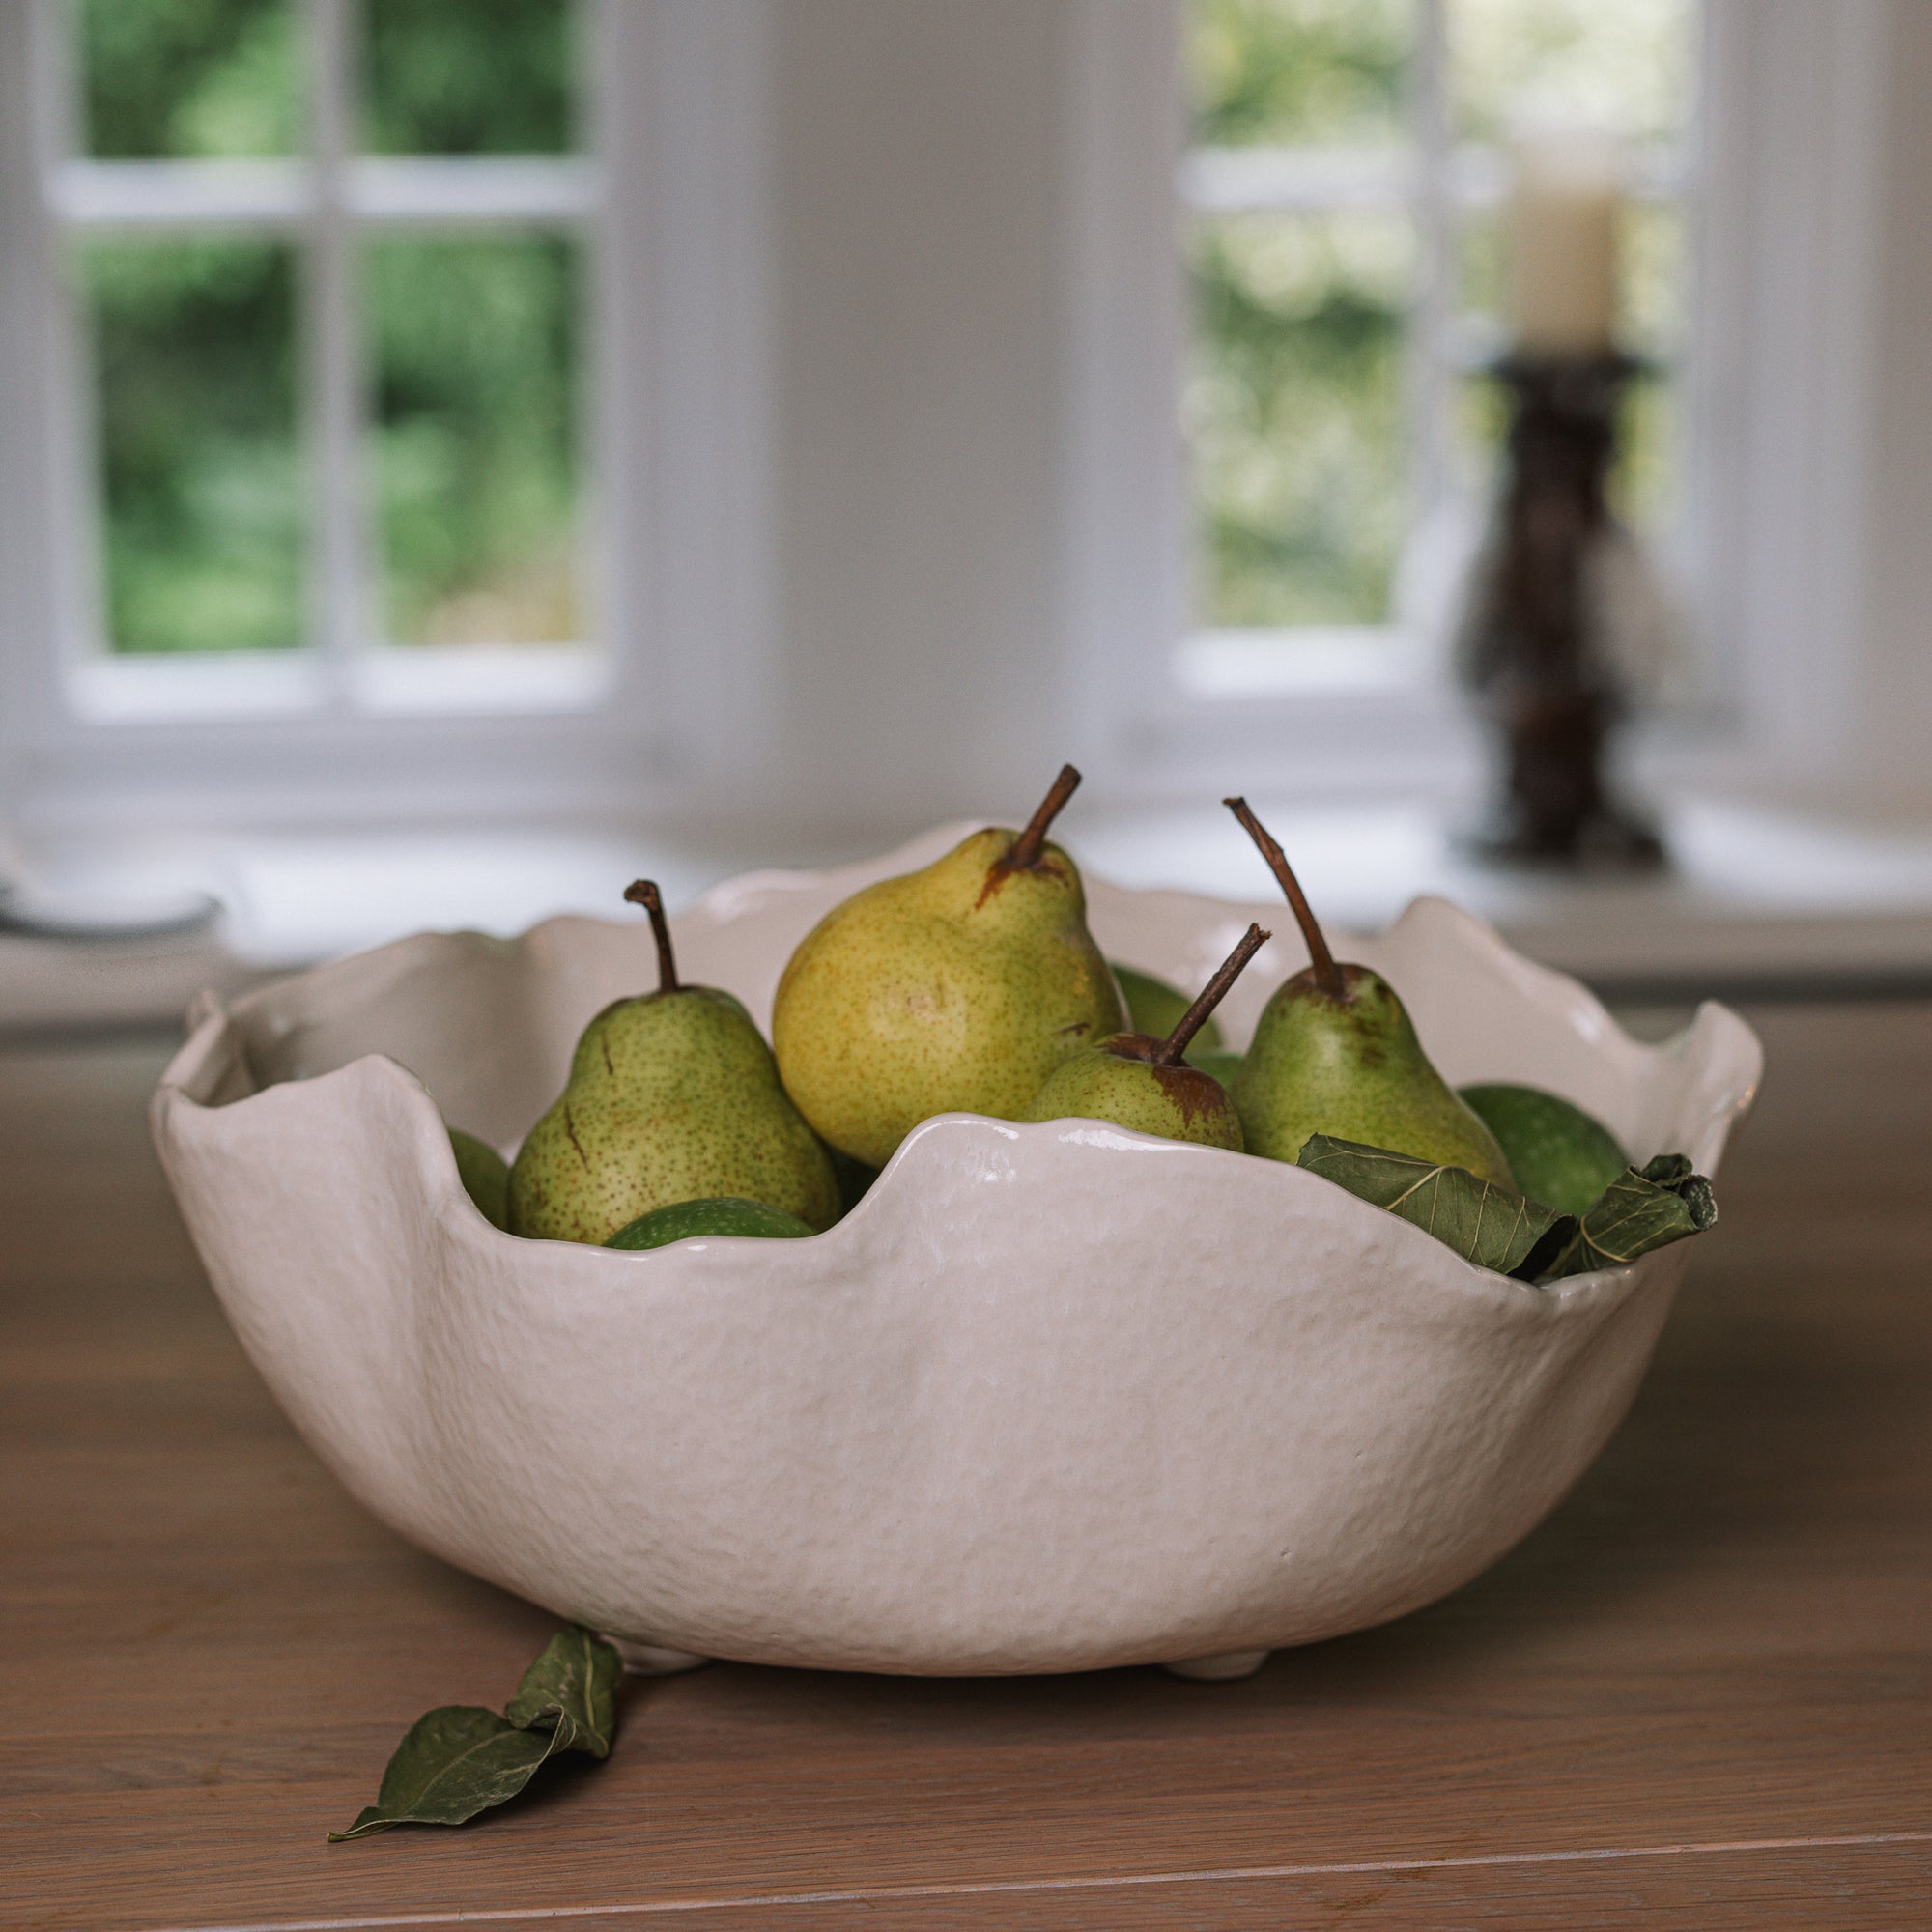 Wavy Ceramic Bowl filled with pears and leaves.